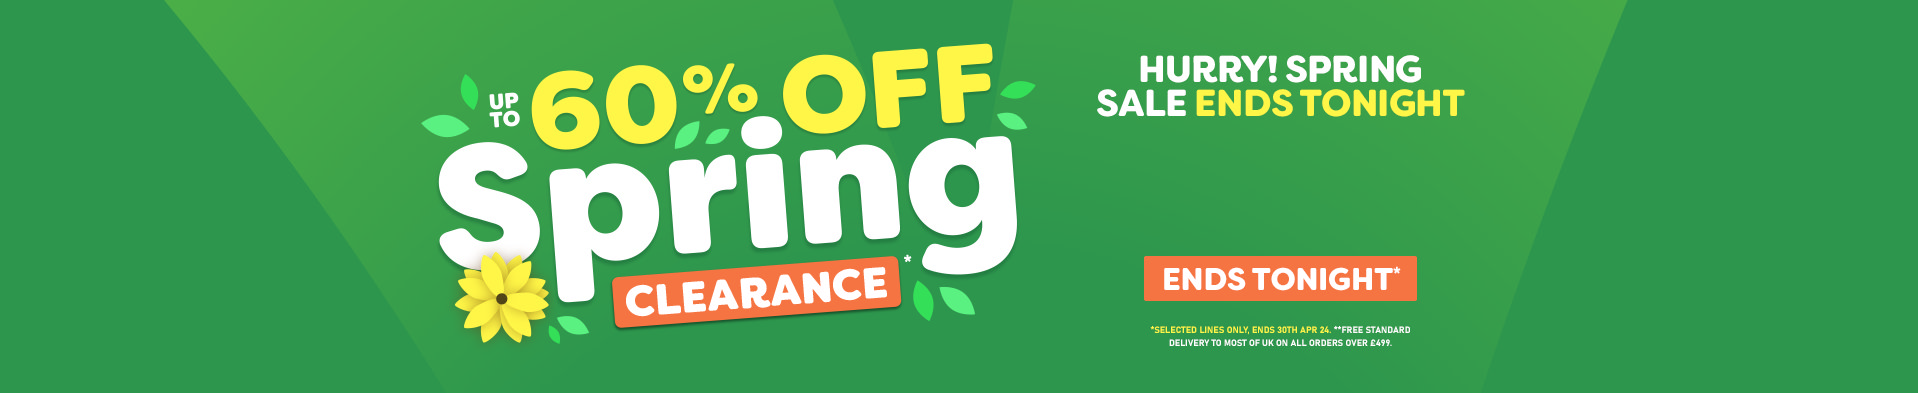 Spring Clearance - Ends Tonight